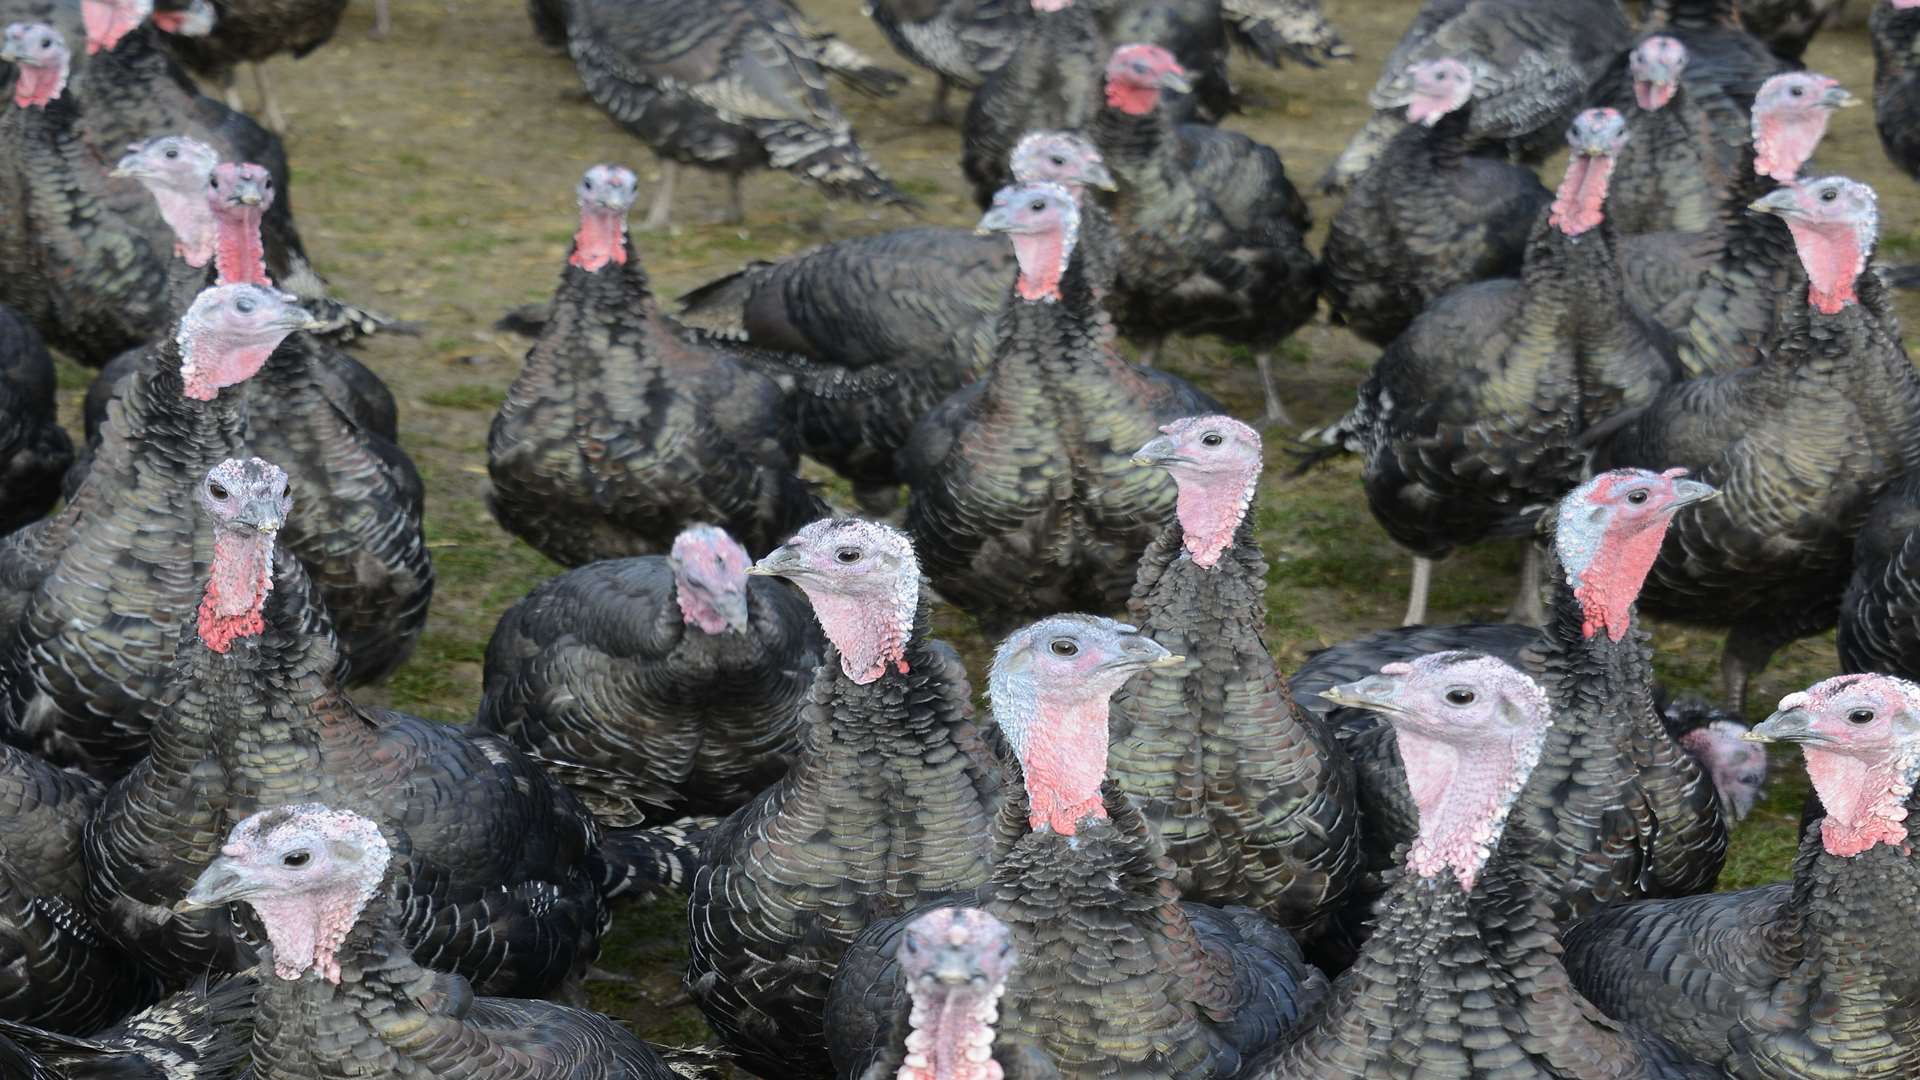 Fred Durham wanted to buy a live turkey. Stock image.